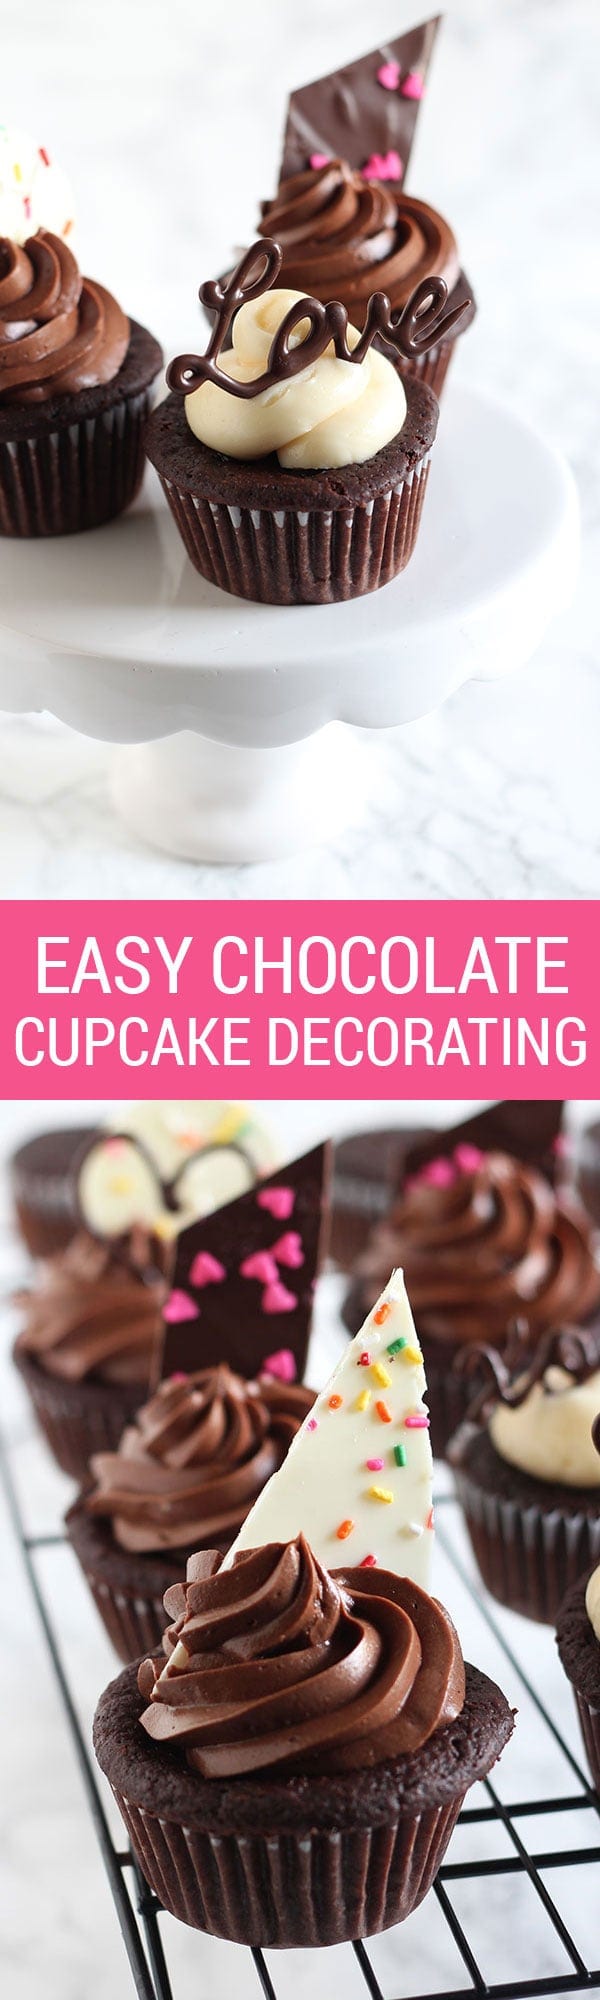 Easy Chocolate Cupcake Decorating with a full step-by-step video tutorial showing you how to make beautiful, elegant, and gourmet chocolate cupcake toppers with NO special equipment or skill required. Free tracing template too!